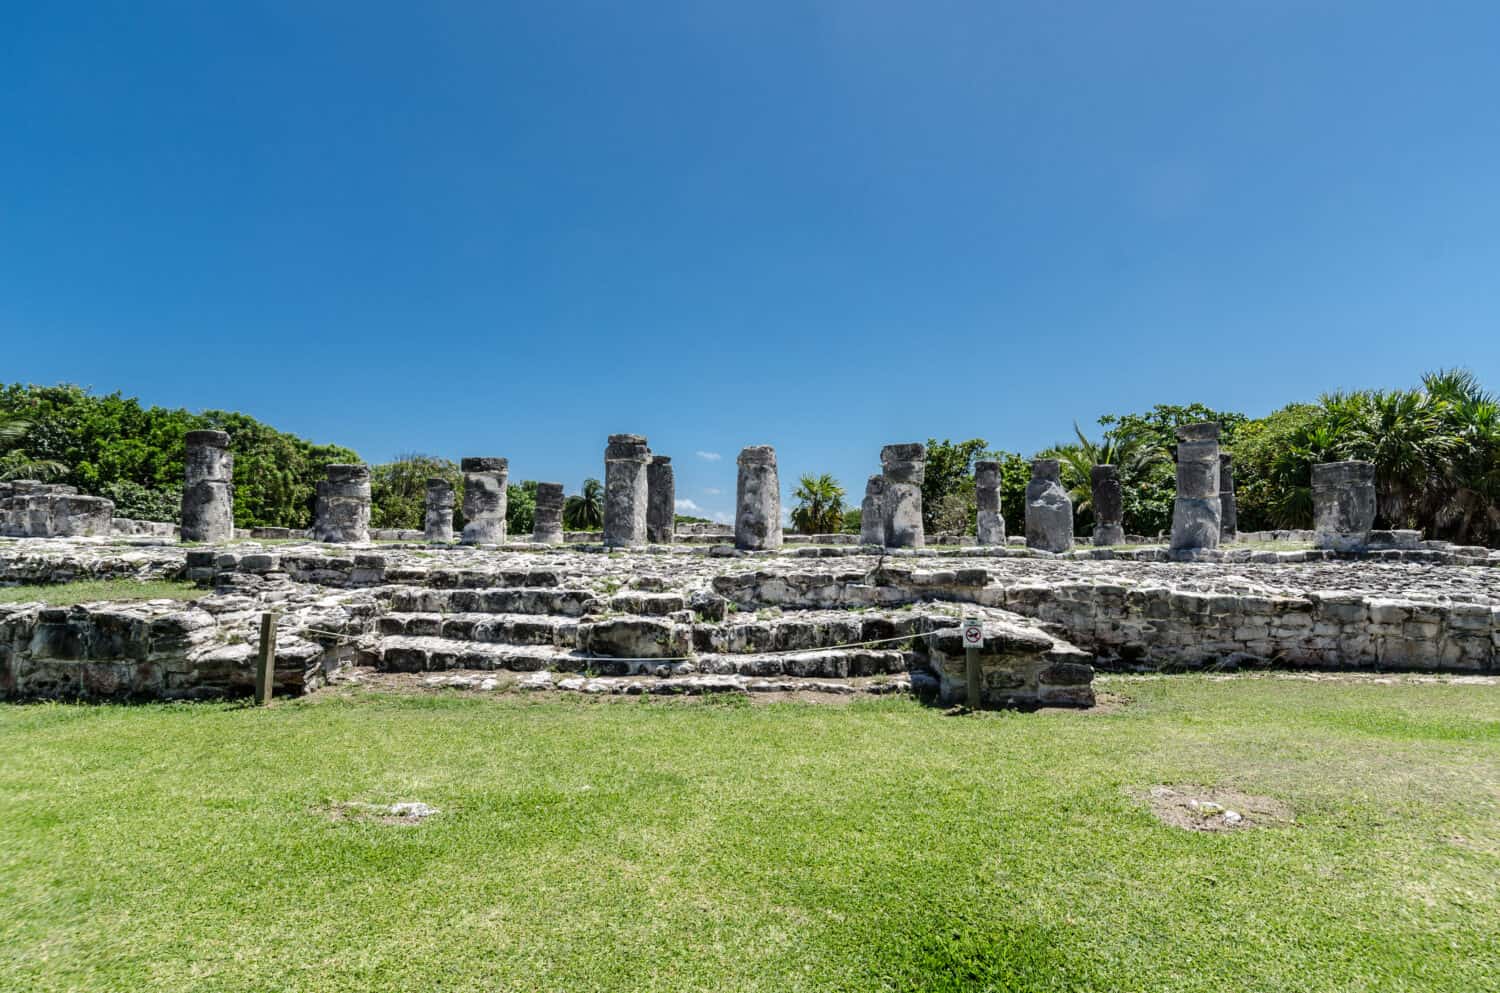 Archaeoligical site of El Rey near the Mirador in the Hotel Zone of Cancun